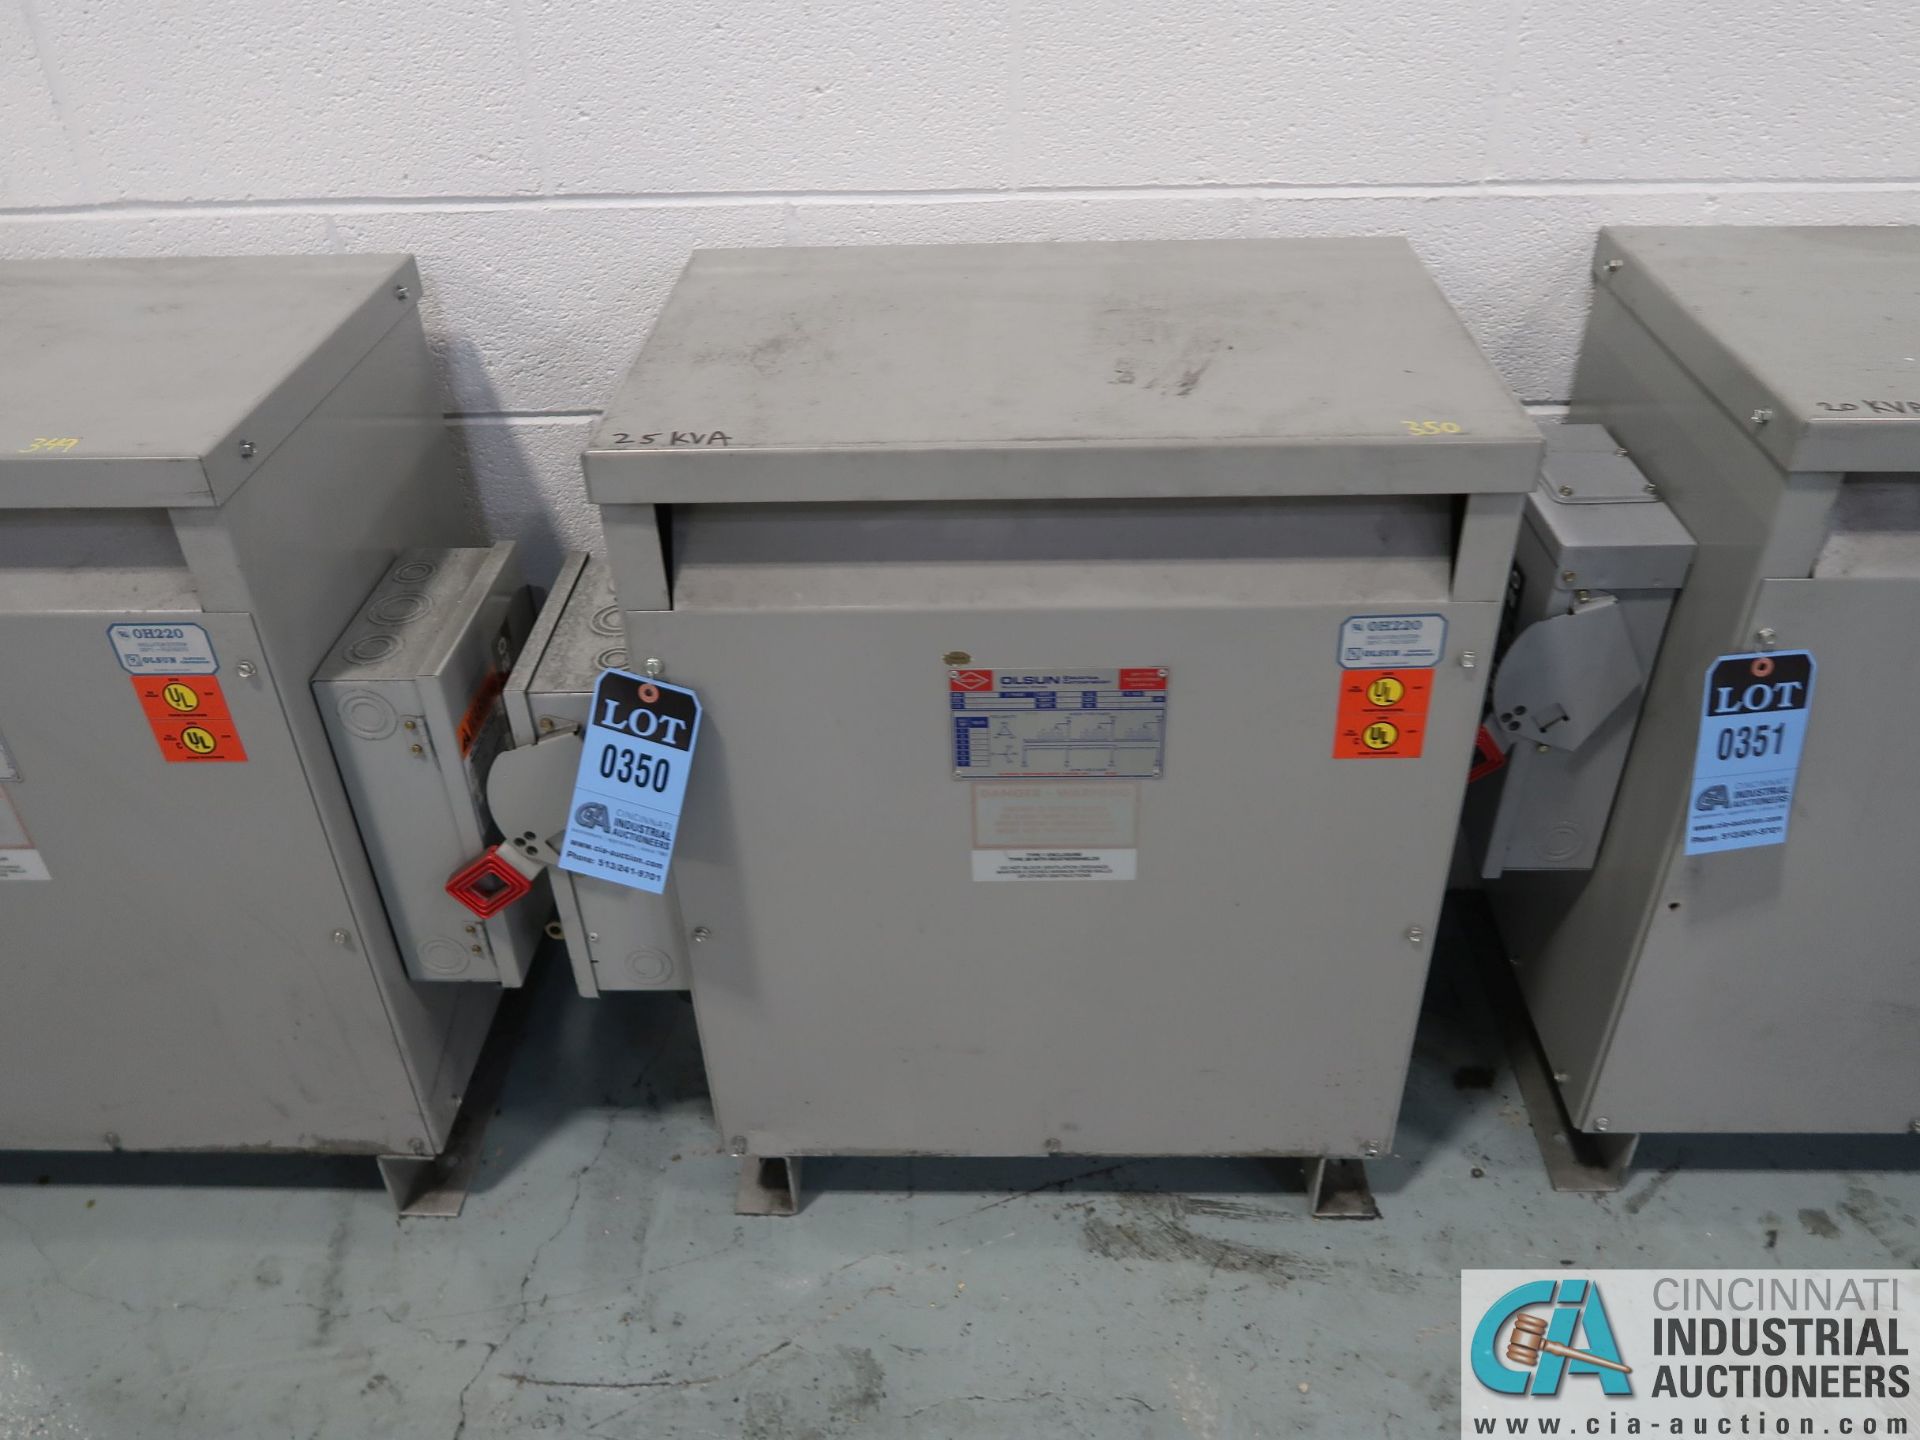 25 KVA OLSUN DRY TYPE TRANSFORMER *$25.00 RIGGING FEE DUE TO INDUSTRIAL SERVICES AND SALES*